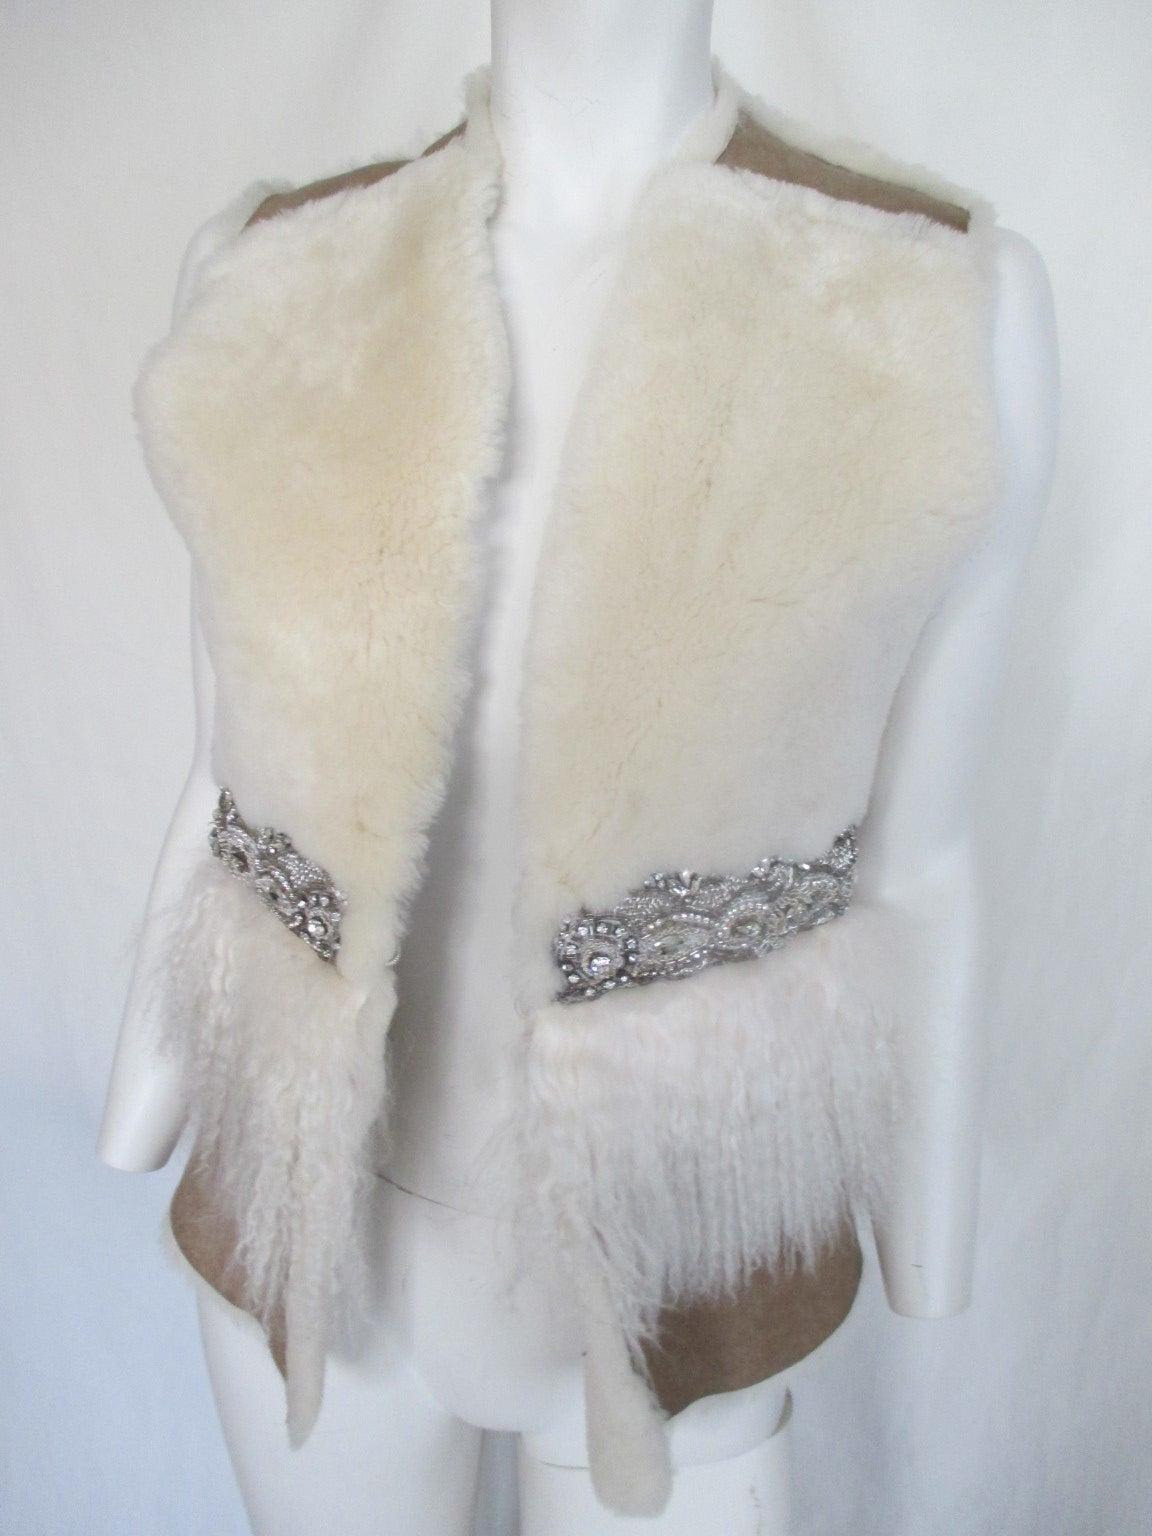 Unique Shearling Gilet 

We offer more exclusive fur items, view our front store

Details:
Brand; Baboons, Switzerland
Soft shearling leather
Tibetan lamb
Silver details
2 closing hooks
Size fits as small, see section measurements.

Please note that